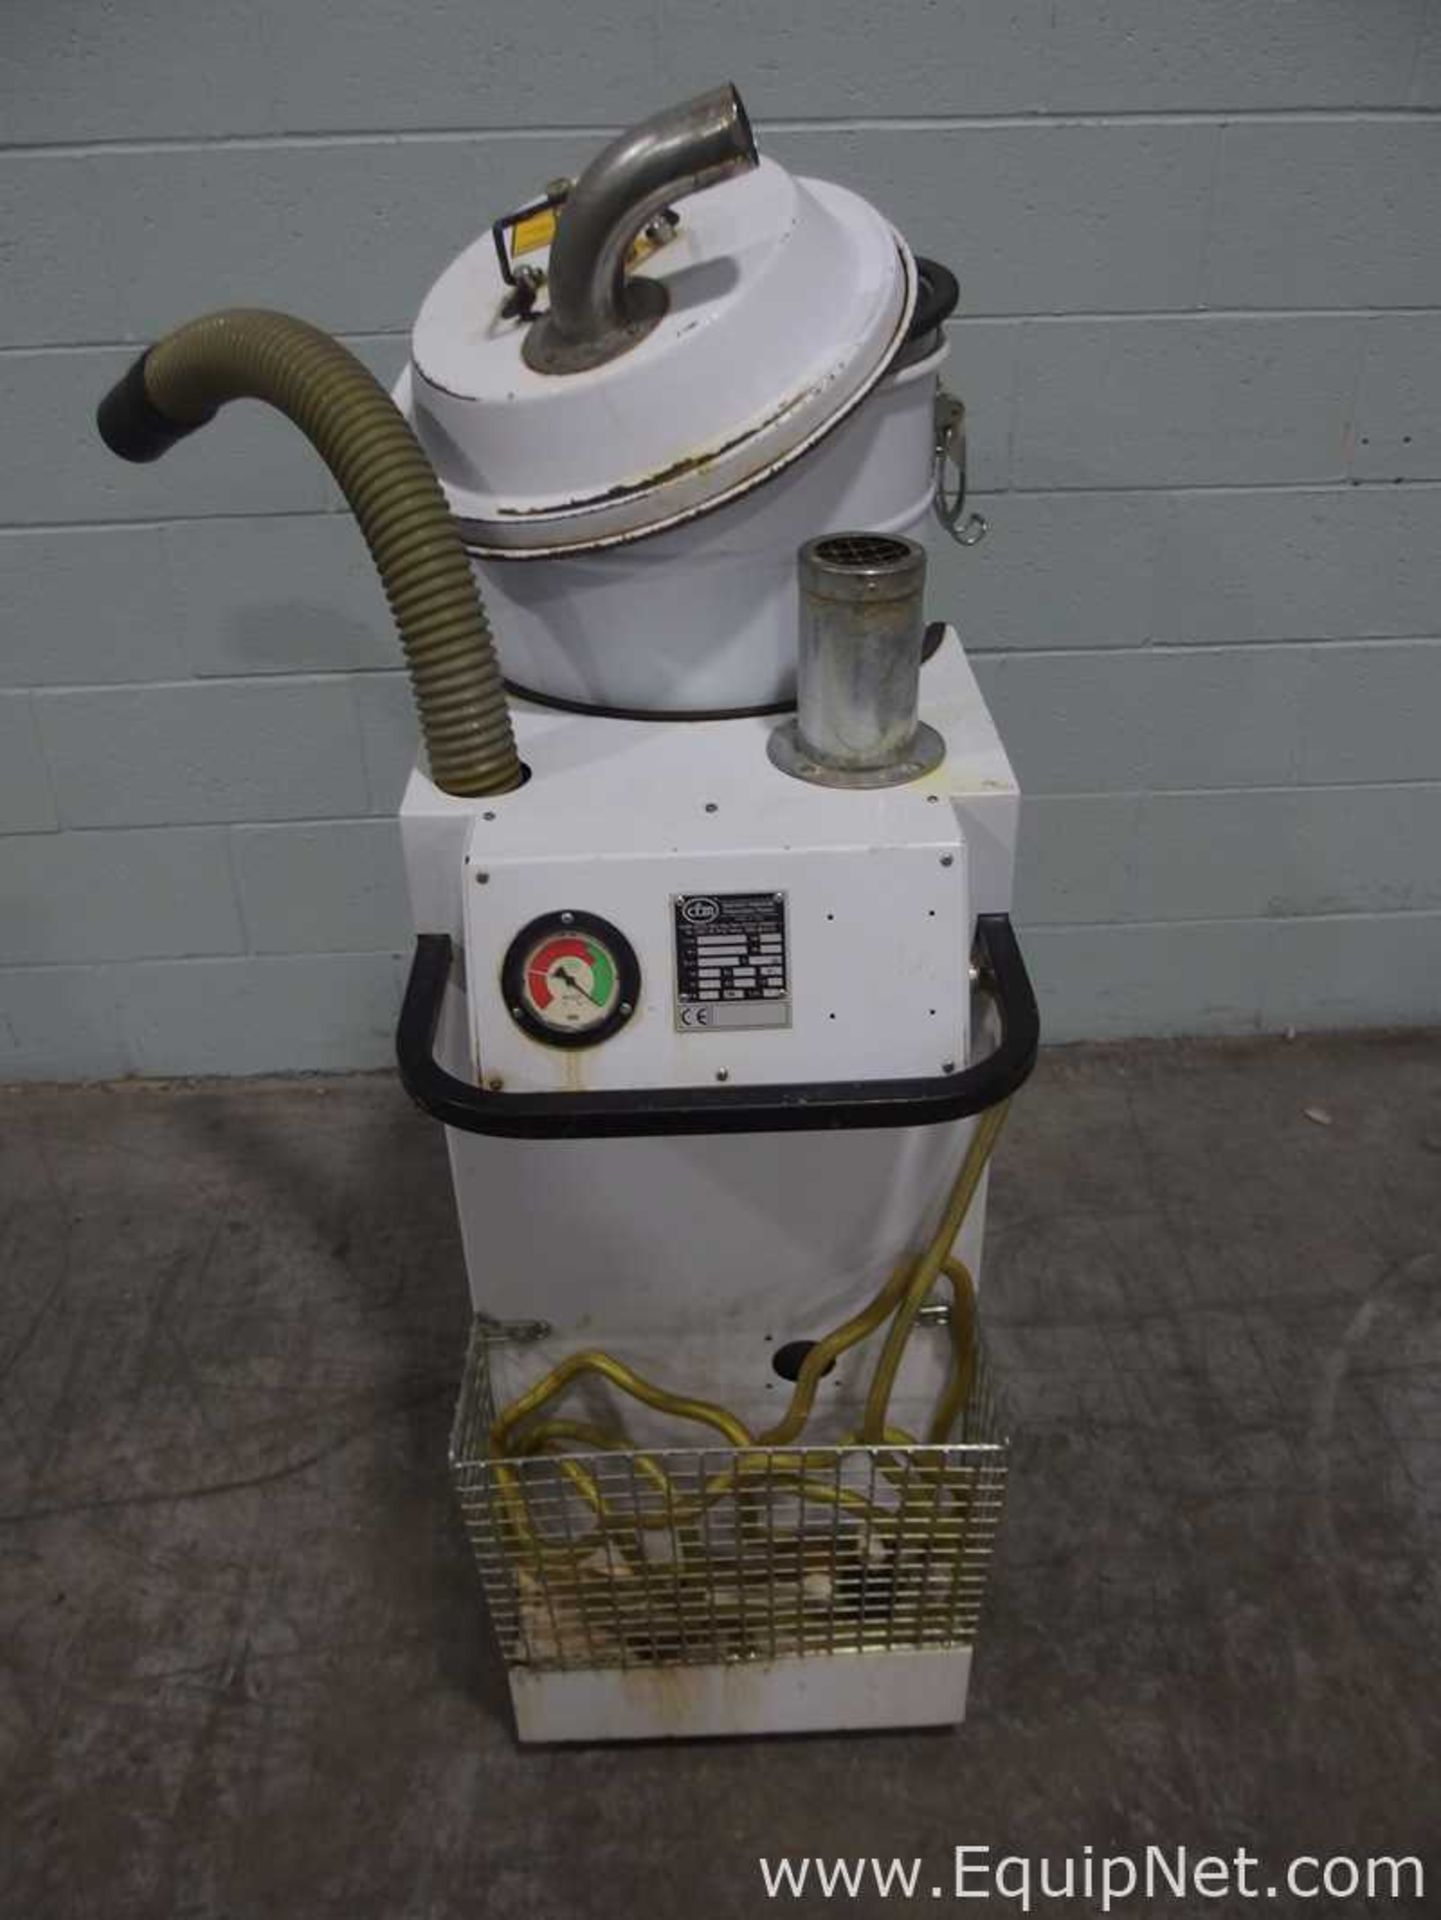 Lot of 2 CFM 3156 Industrial Vacuums - Image 13 of 14